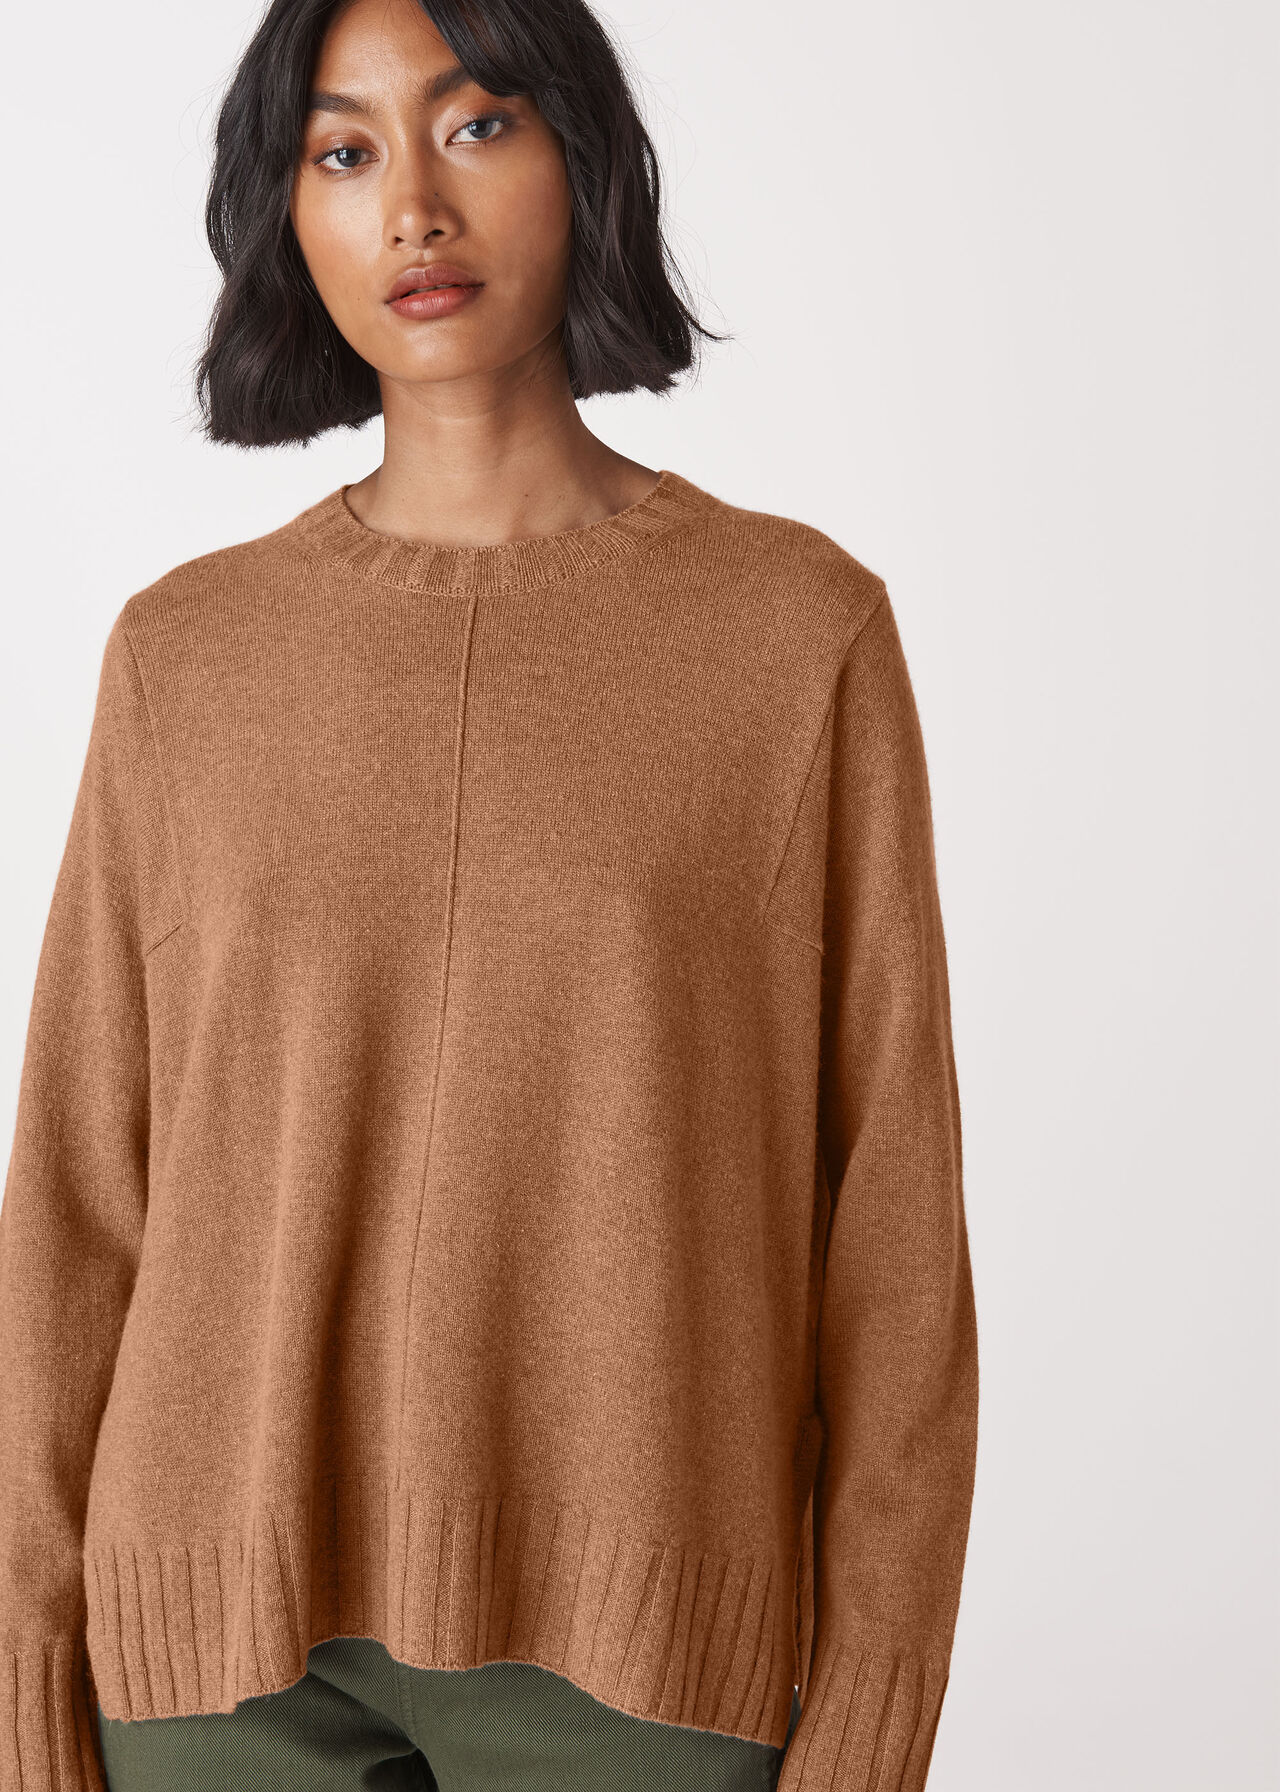 Camel Cashmere Crew Neck Sweater | WHISTLES | Whistles